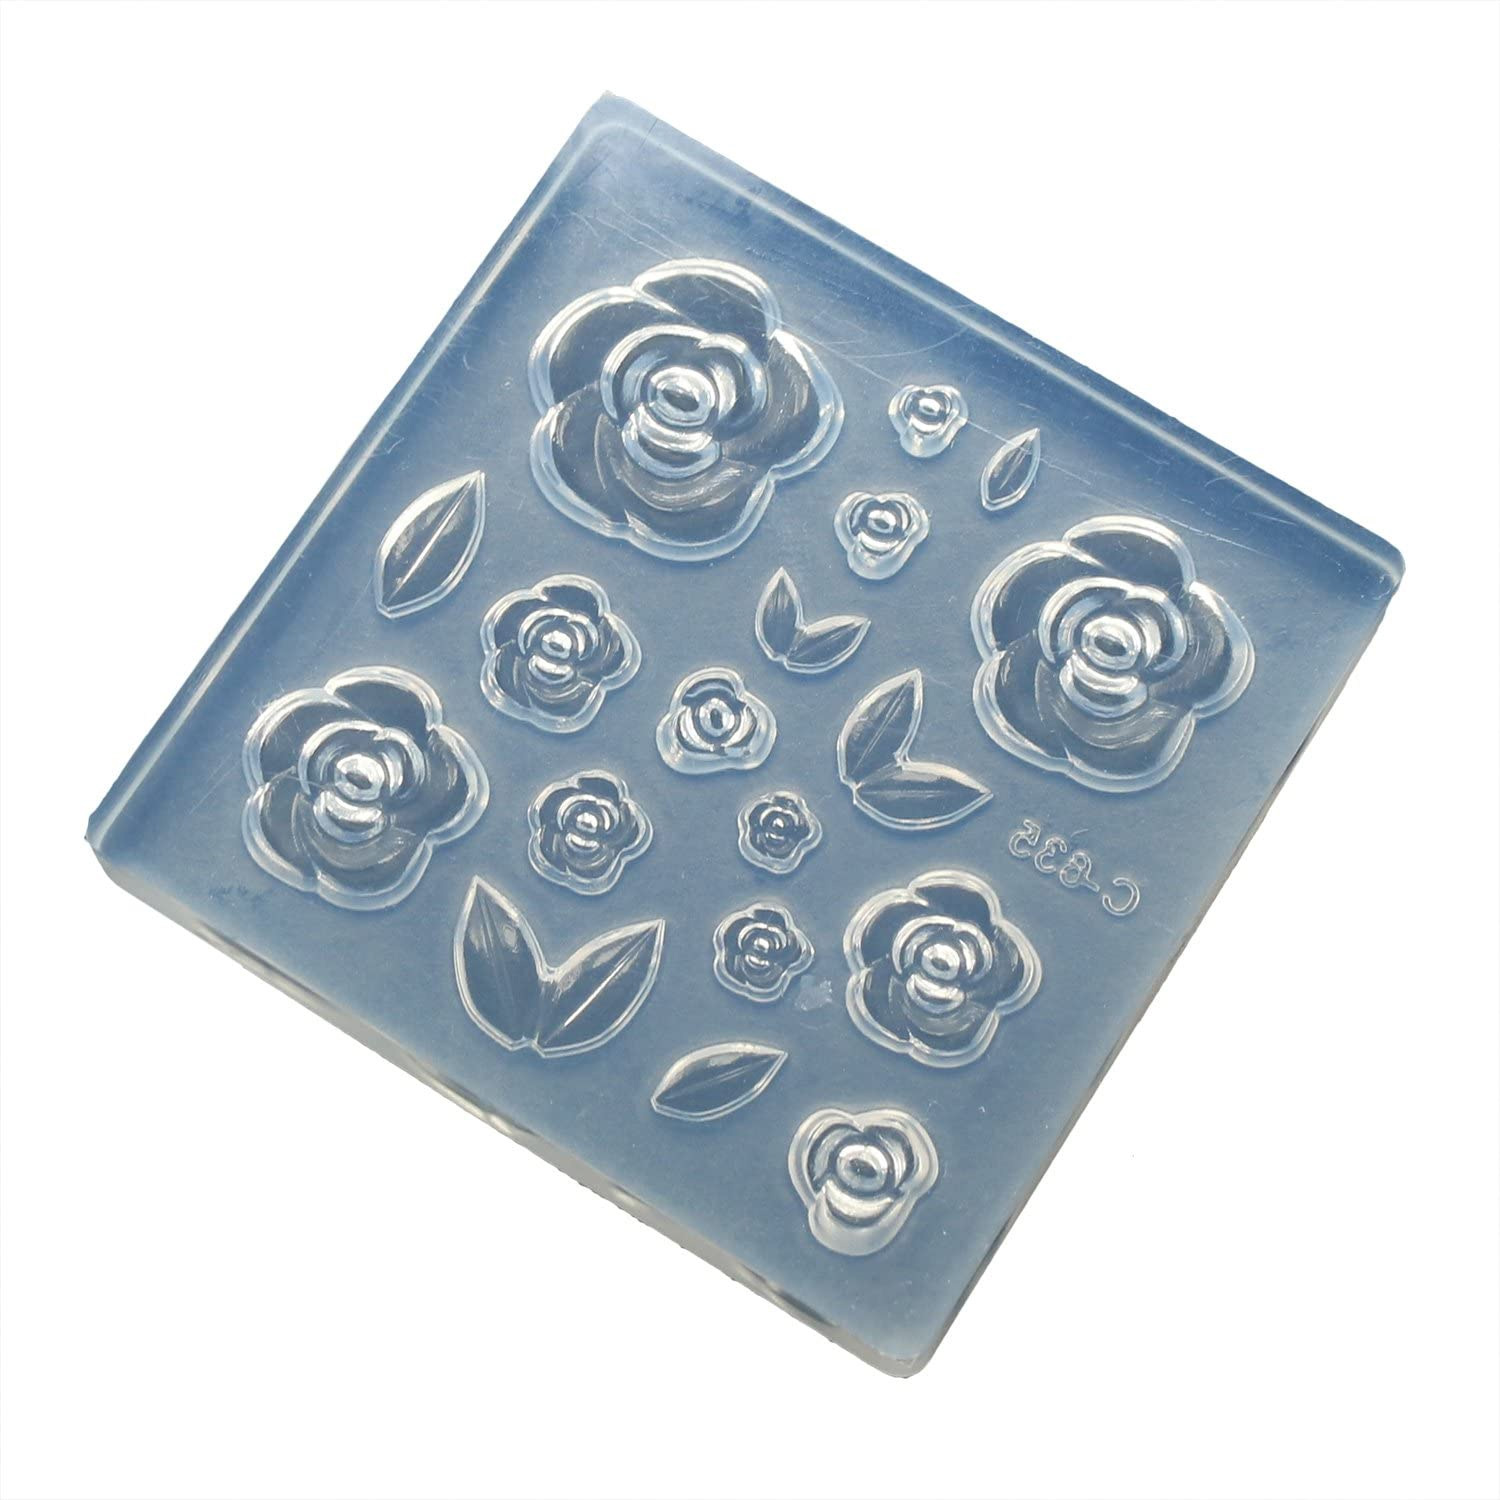 KAM-REJ-635  Resin Crafting Silicone Mold  (pcs)